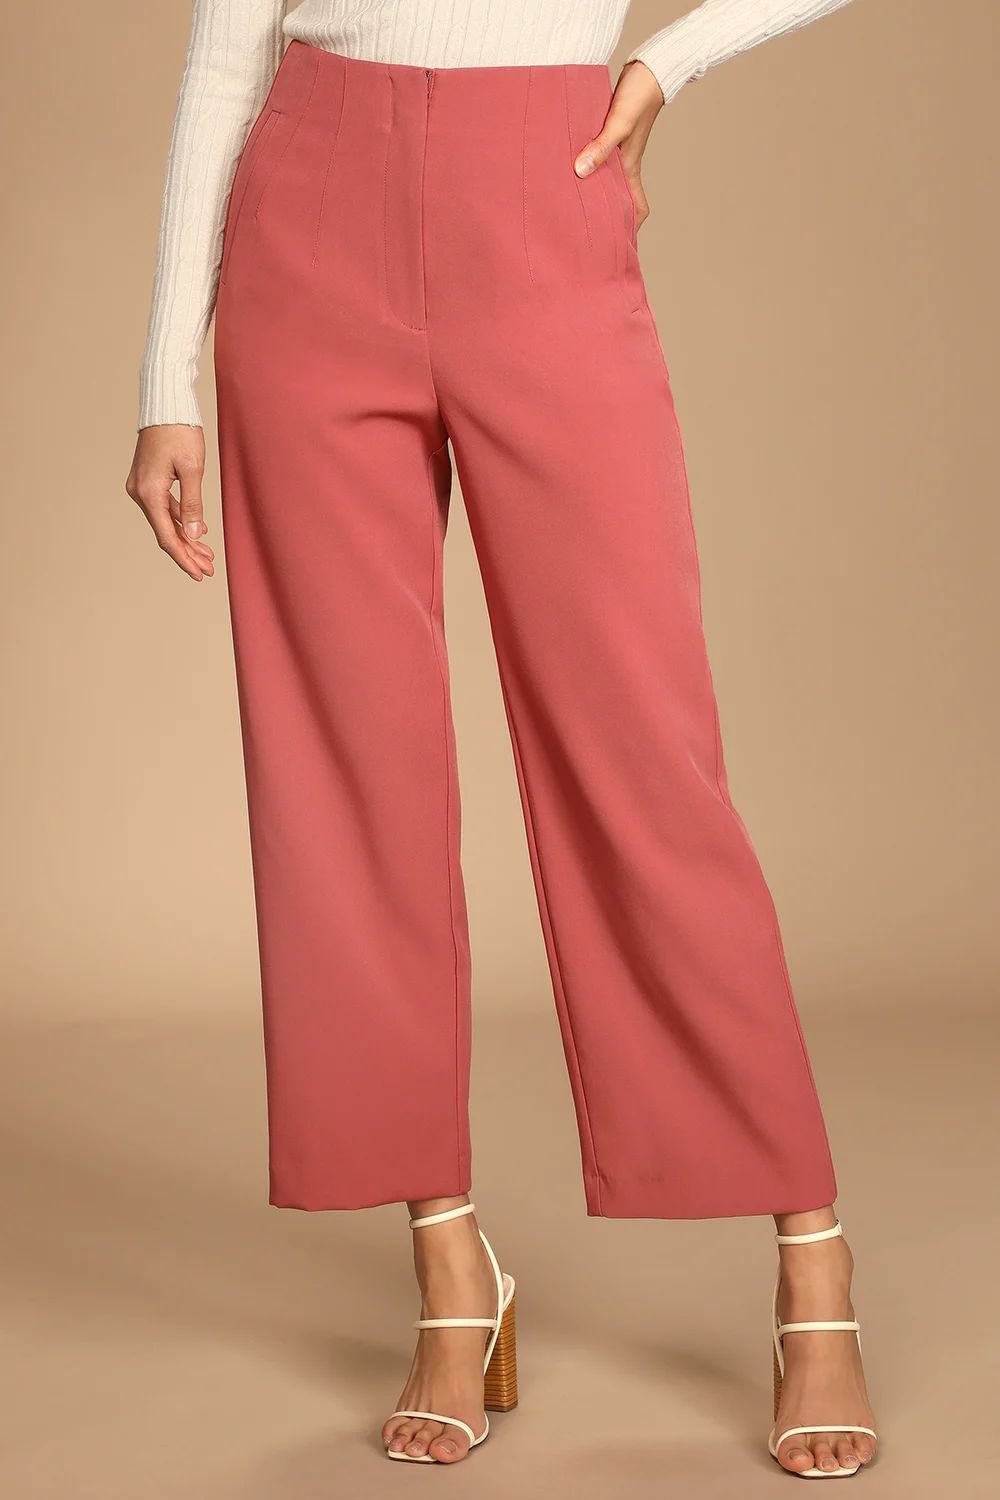 Bold and Classy Mauve Pink High-Waisted Wide Leg Trouser Pants | Lulus (US)